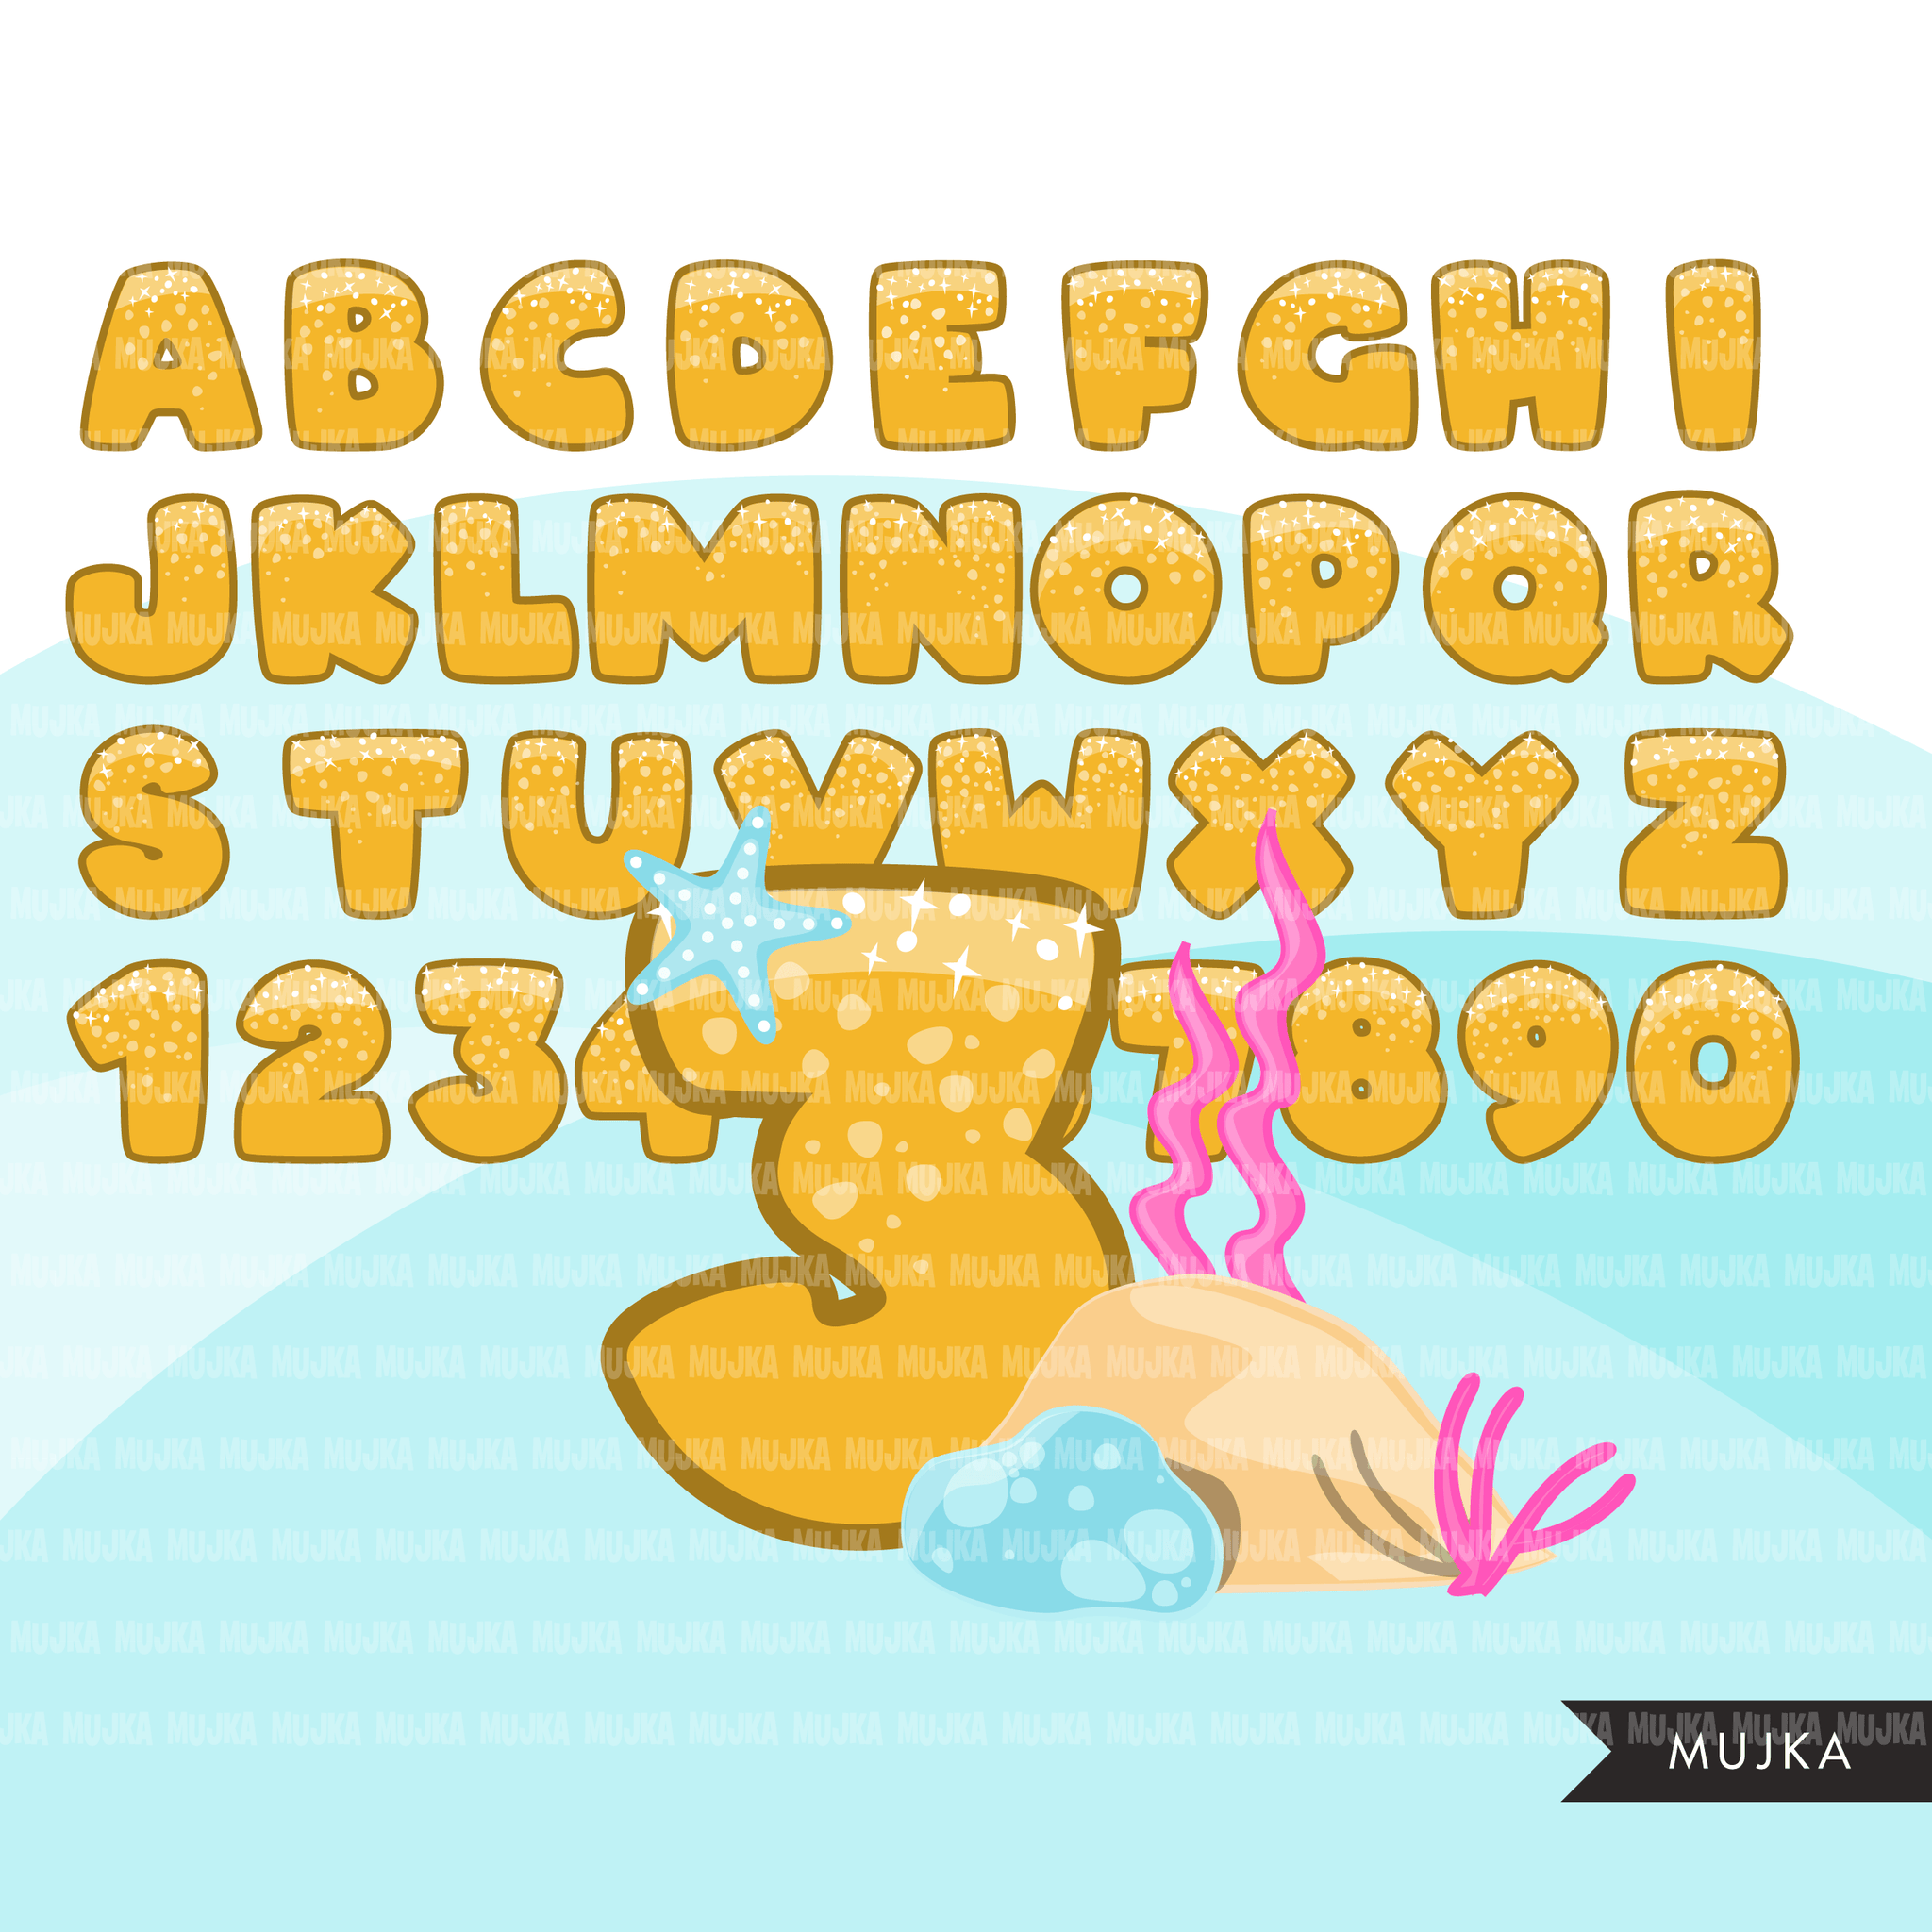 Alphabet Clipart Bundle, Christmas, monsters, rainbow, baby boy and girl, candy, plaid, stitched, science, numbers, PNG clip art